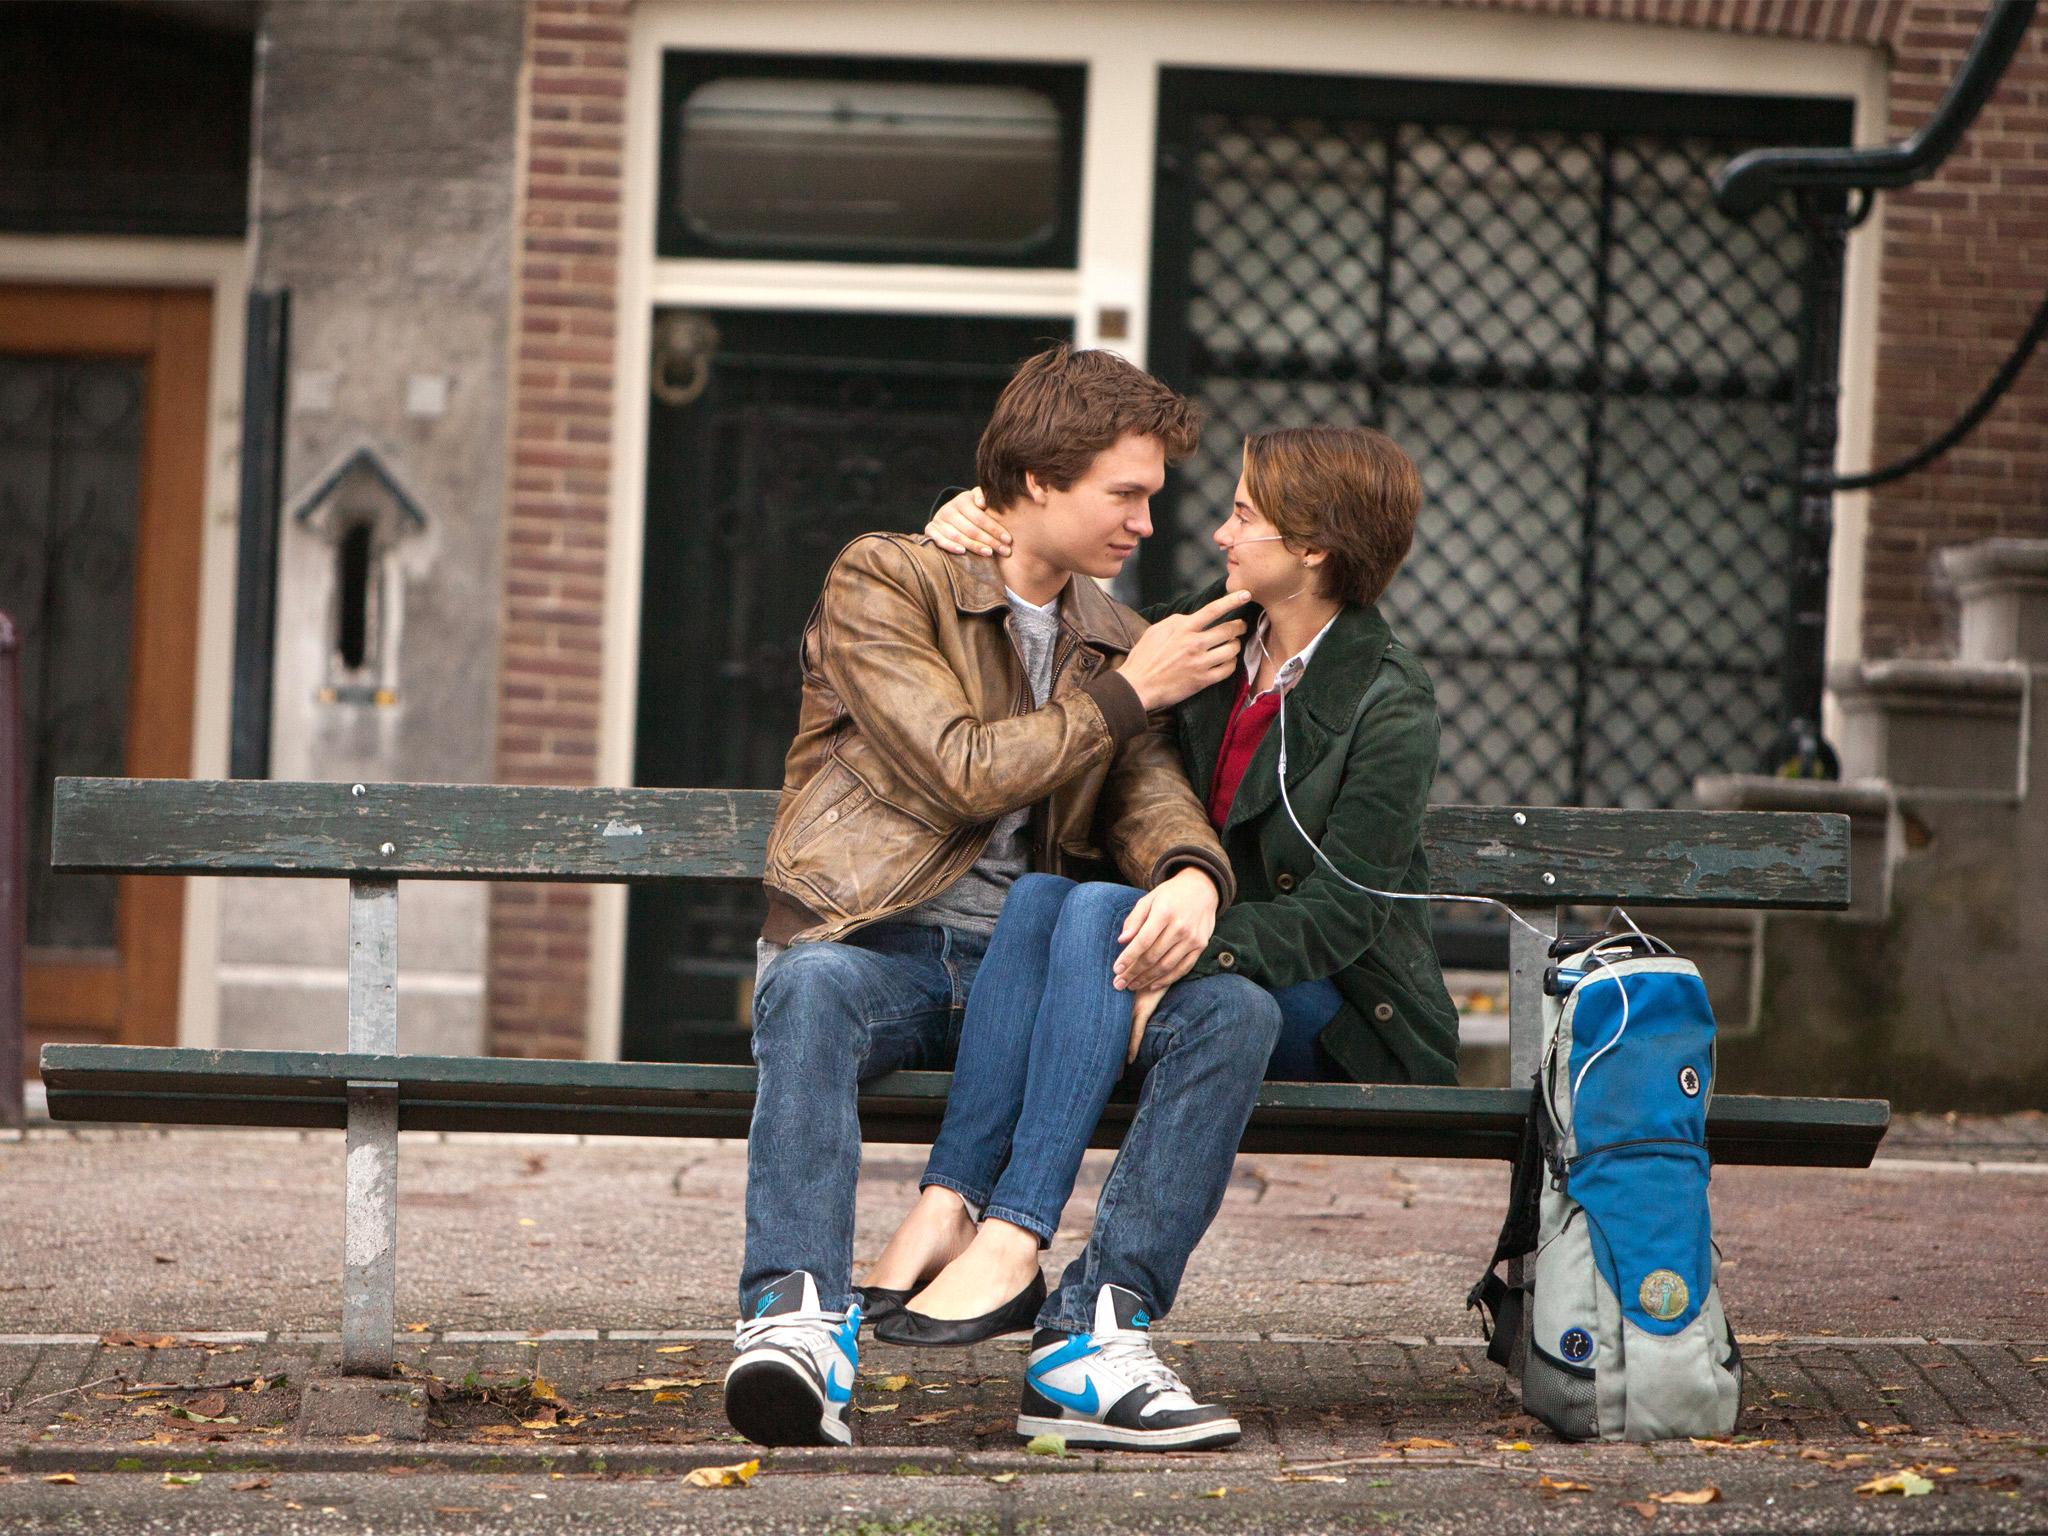 Scene stealing: the bench made famous by ‘The Fault in Our Stars’ has been stolen